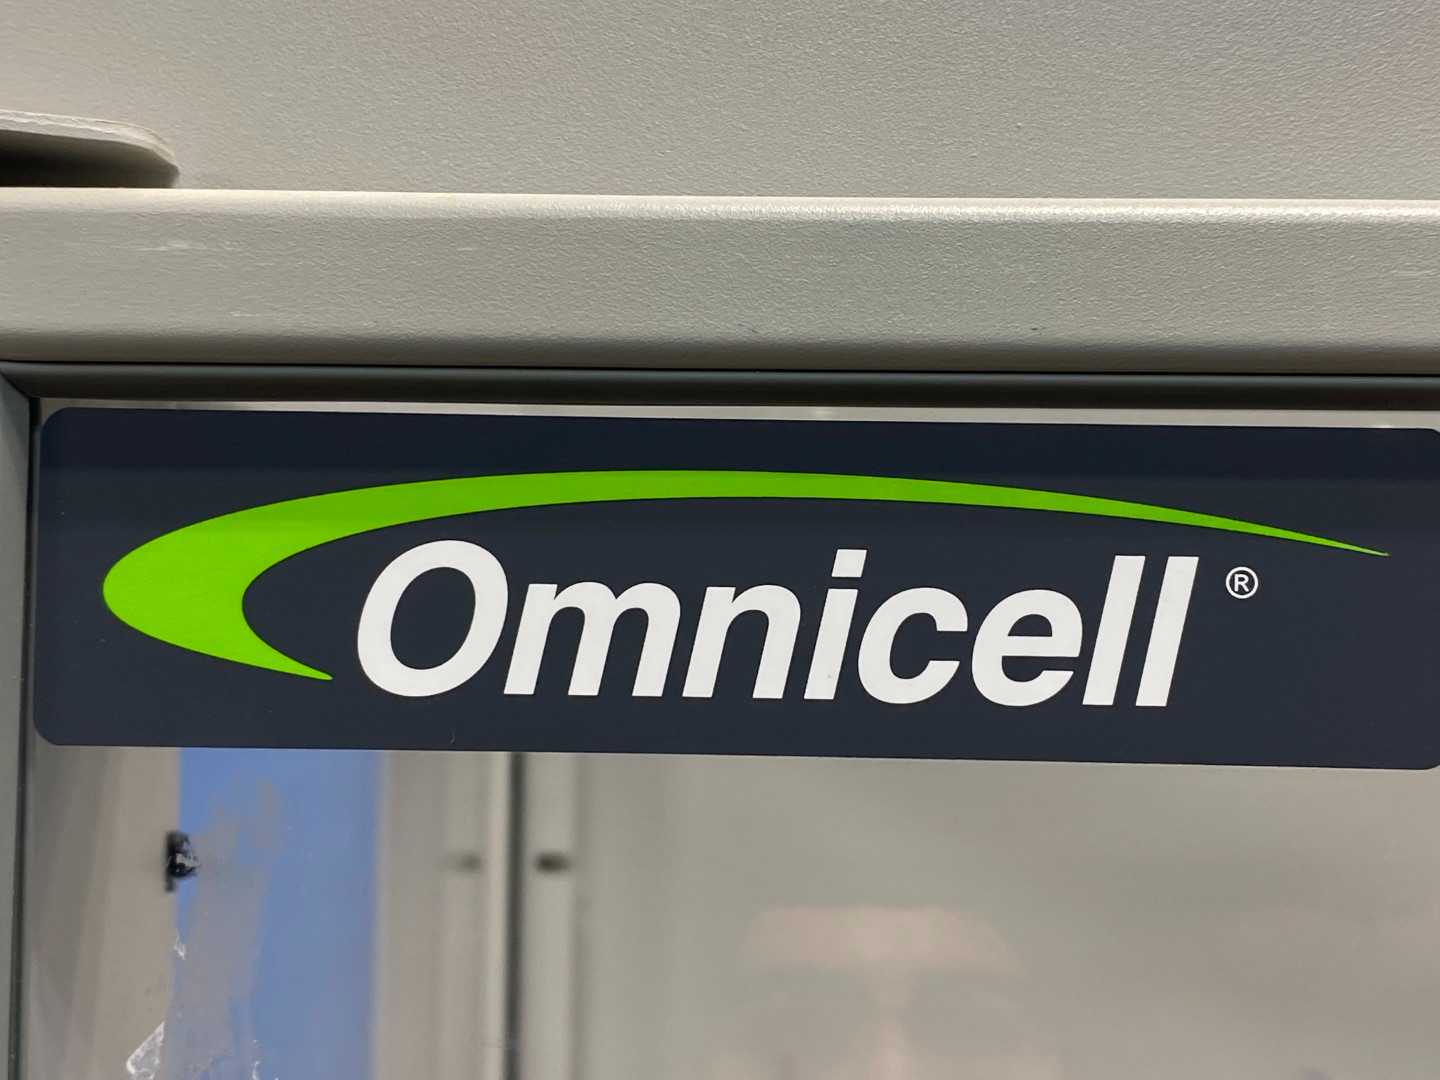 Omnicell 3 Cell OmniSupplier No HDD (Has several scratches)